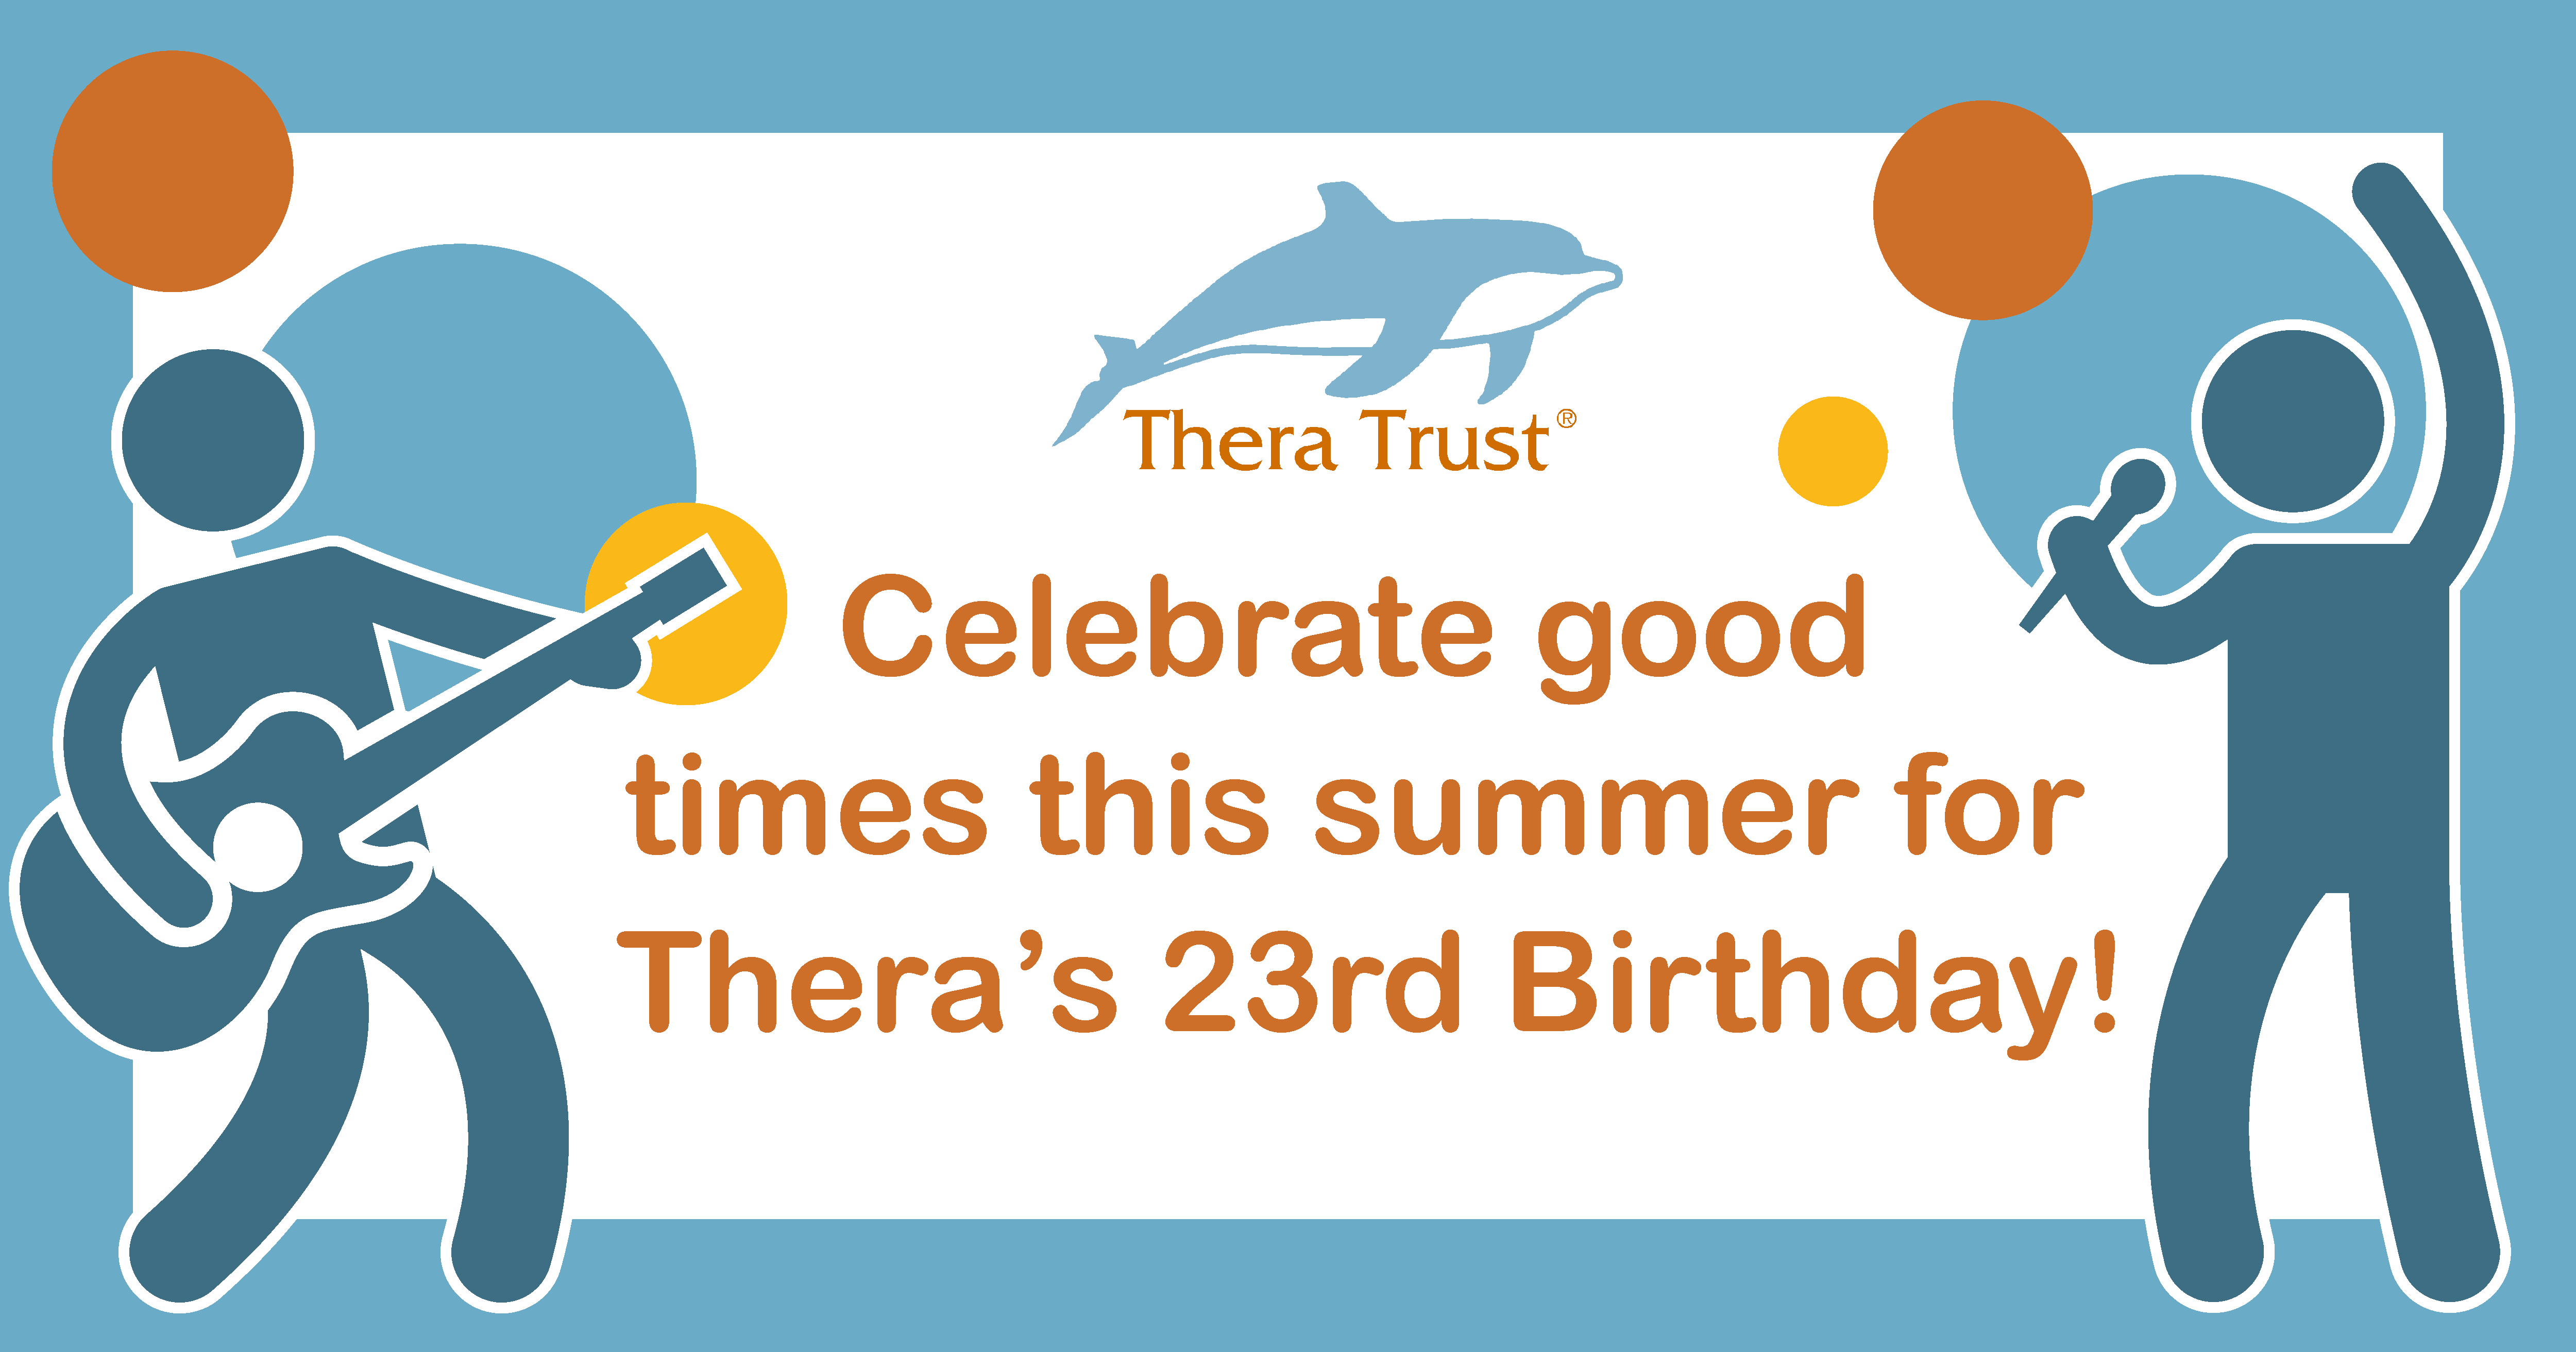 Celebrate good times this summer for Thera's 23rd birthday